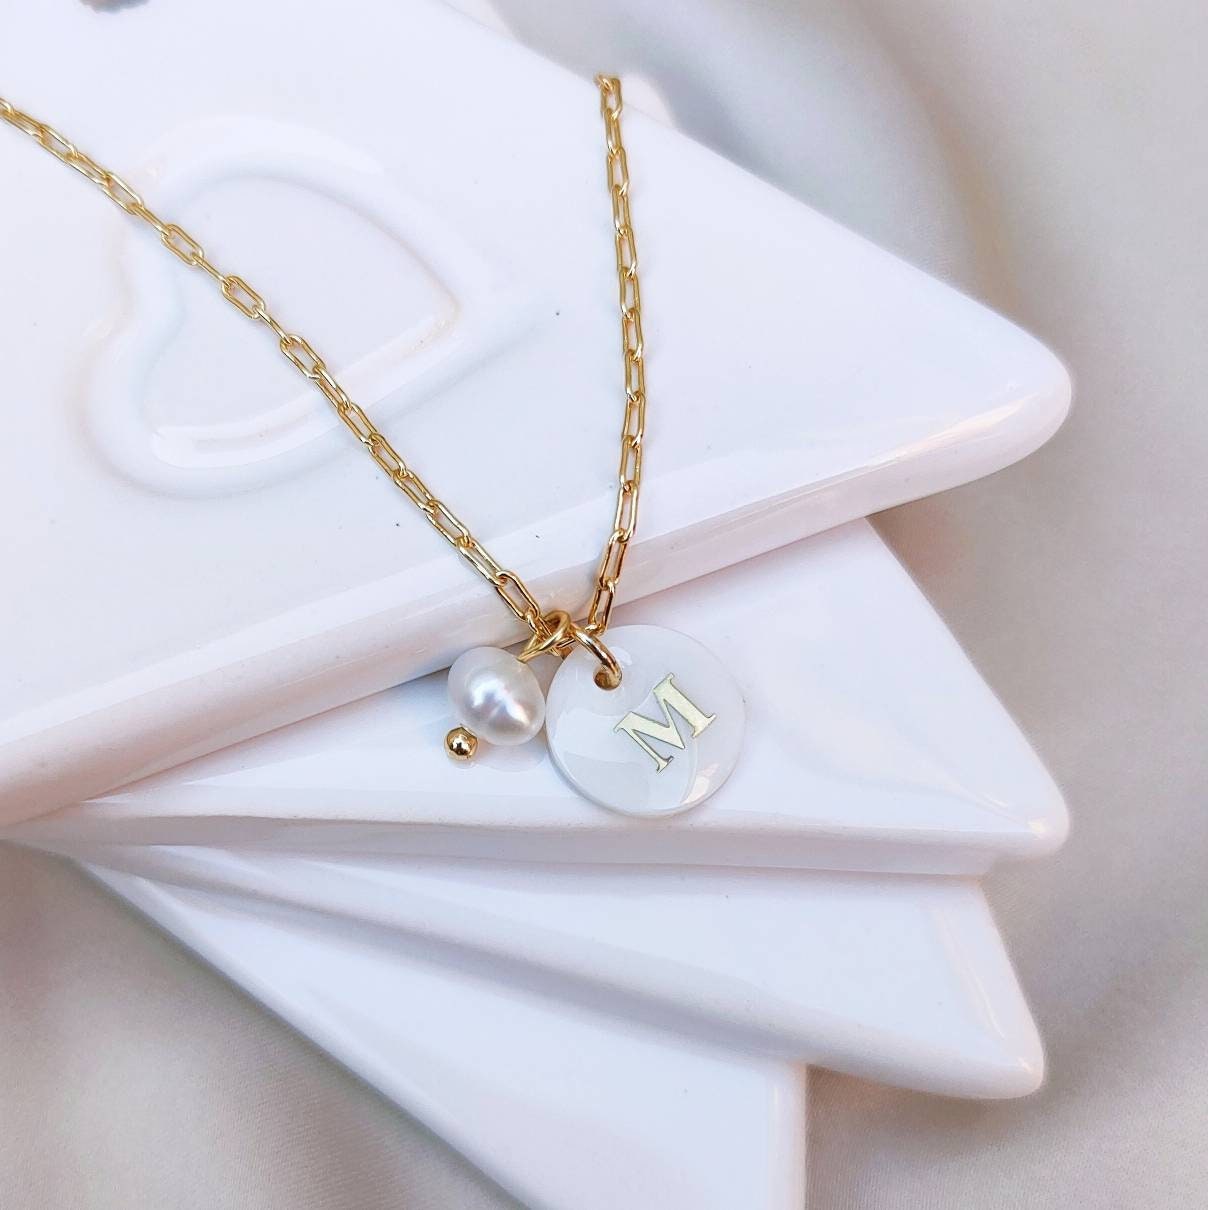 16 Initial Necklaces You Need To Have | Women's Fashion Guide | Classy  Women Collection